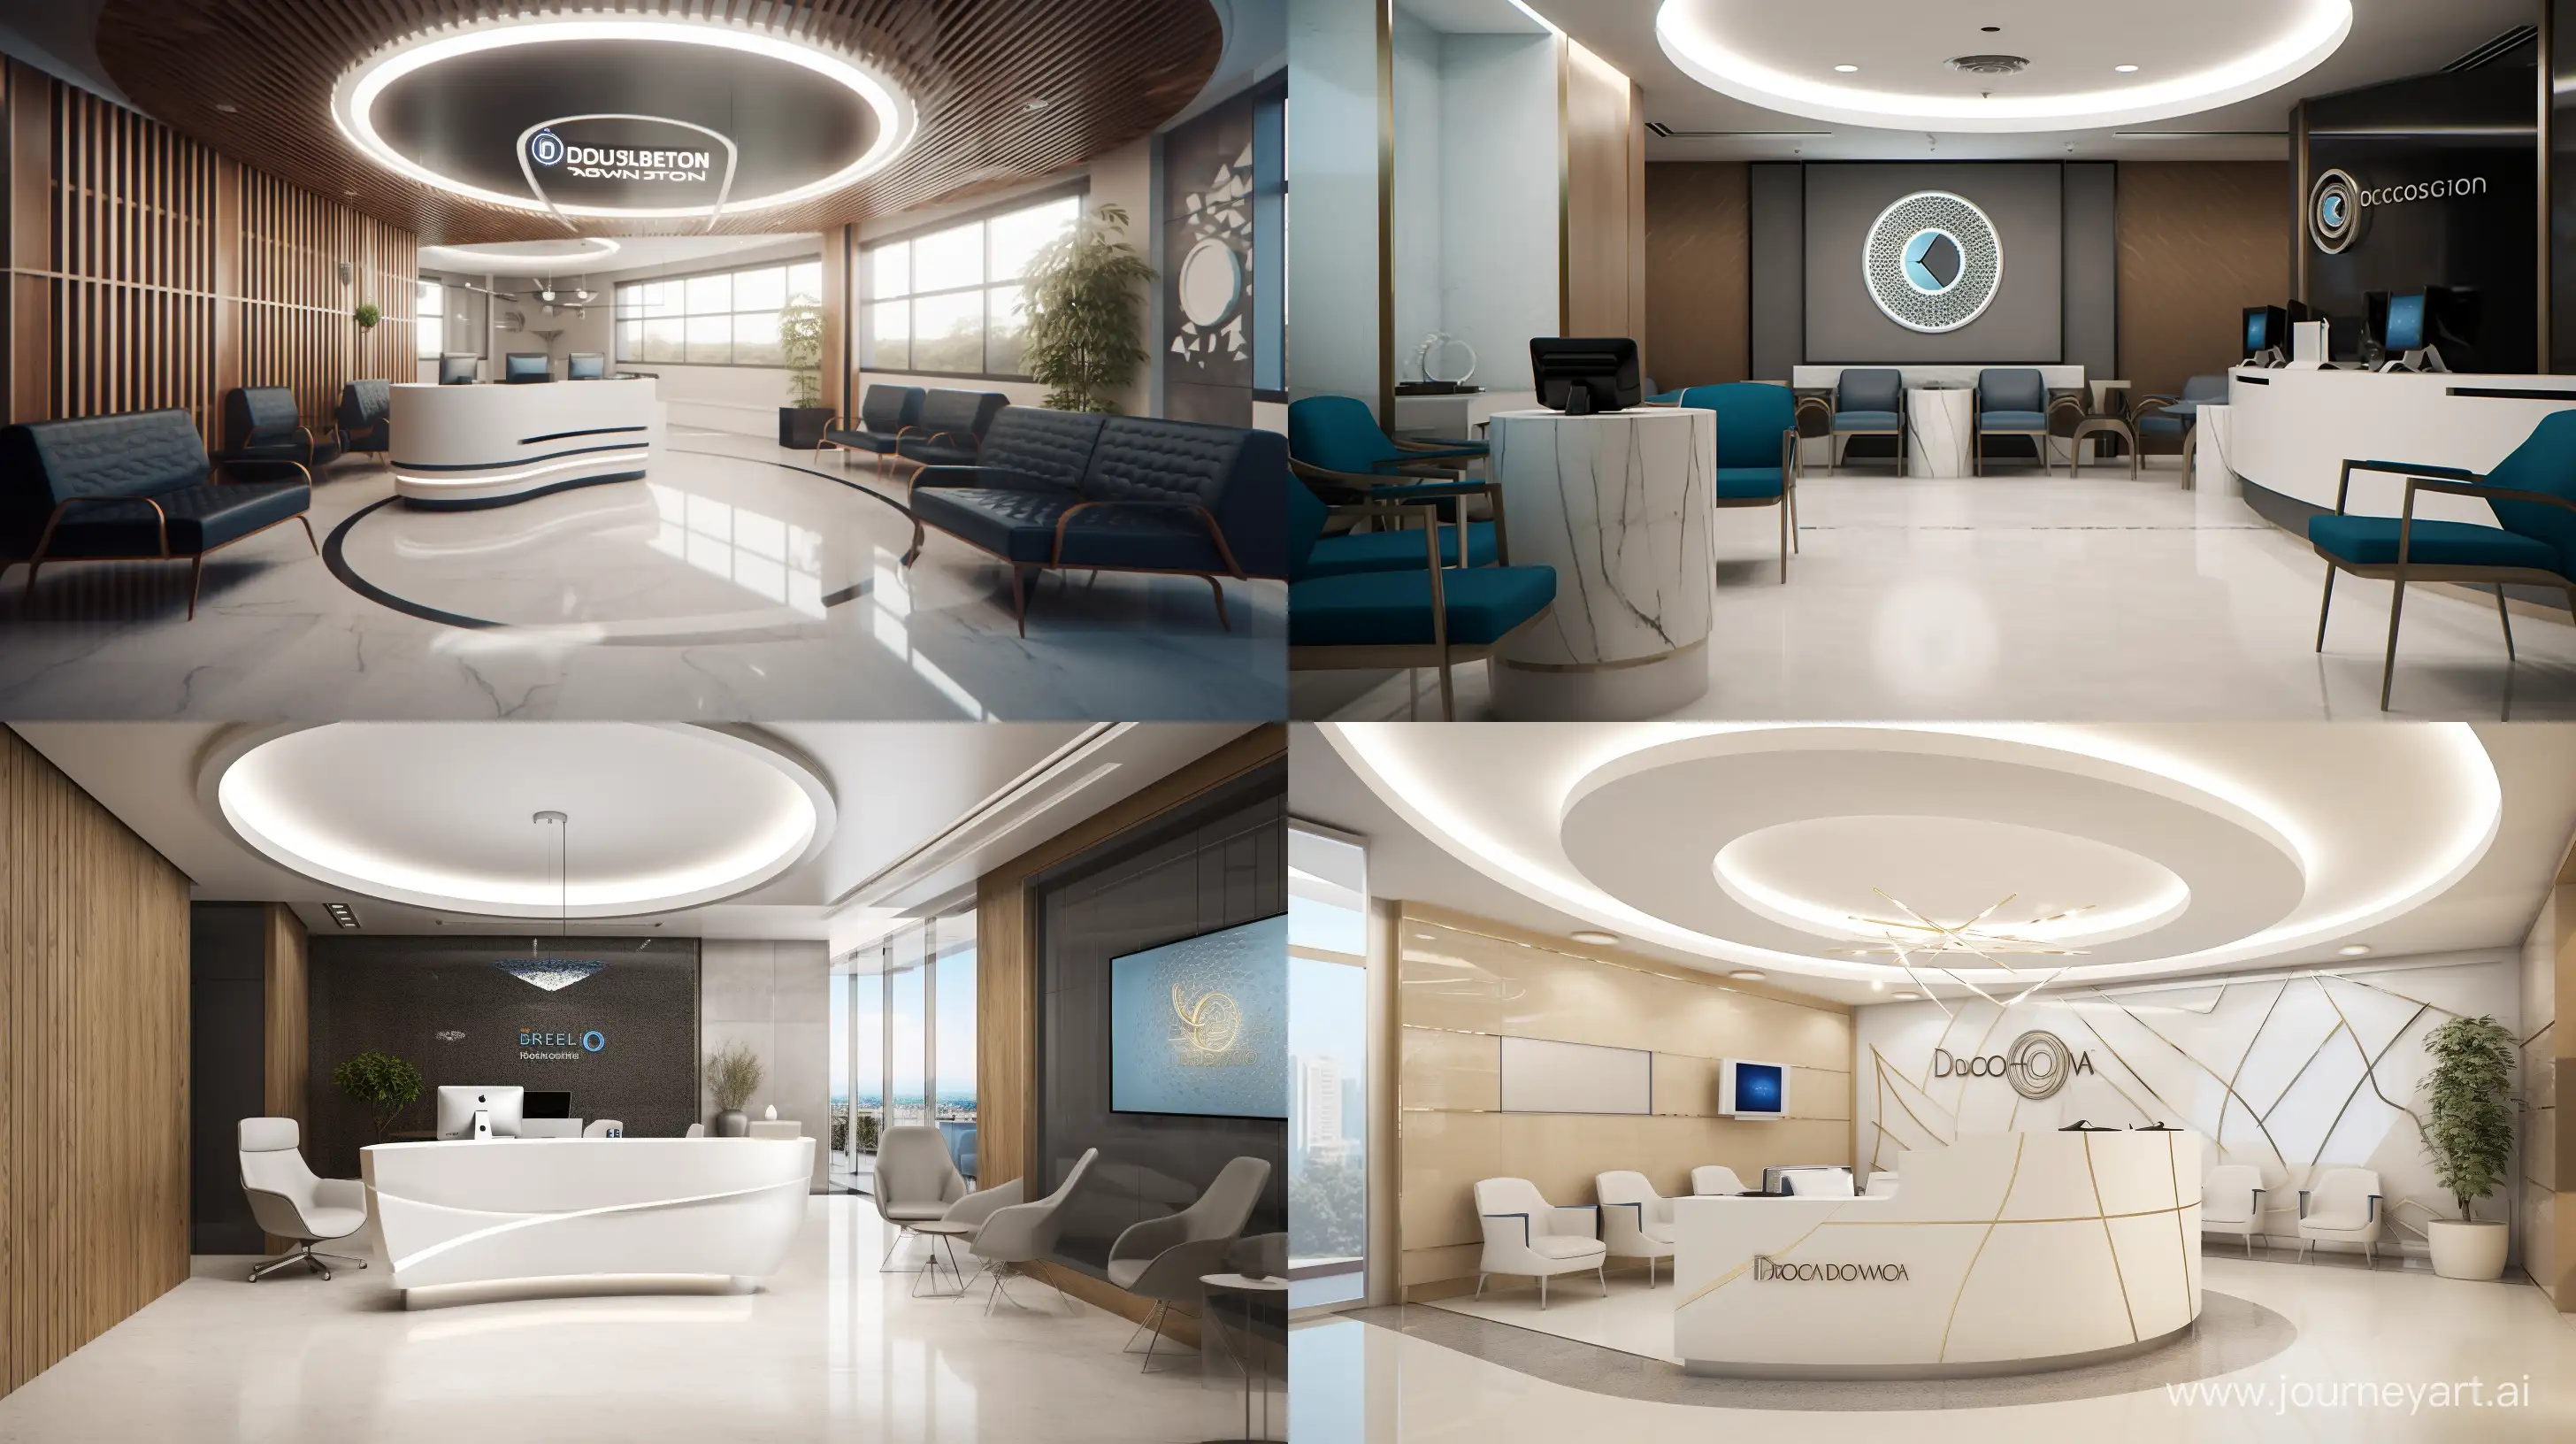 /imagine prompt: A realistic photographic style portrayal of the "Behbod Gostar Didavar" logo within a futuristic ophthalmology clinic, using a wide-angle lens to capture the sleek and modern environment, Photography, wide-angle lens (24mm), --ar 16:9 --v 5
